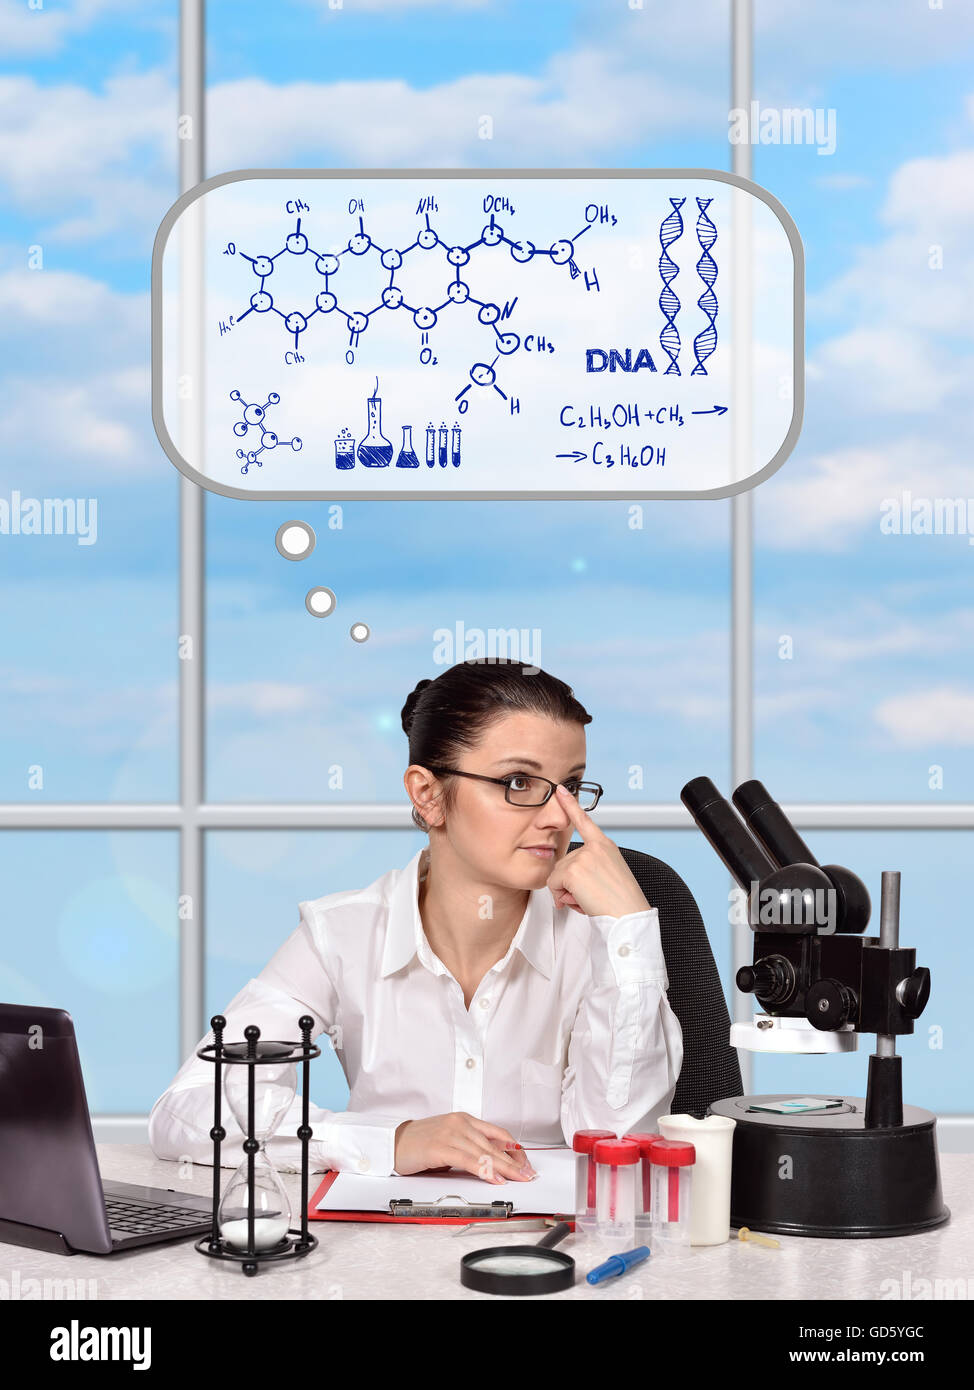 scientific researcher woman thinking about creating new medicament Stock Photo